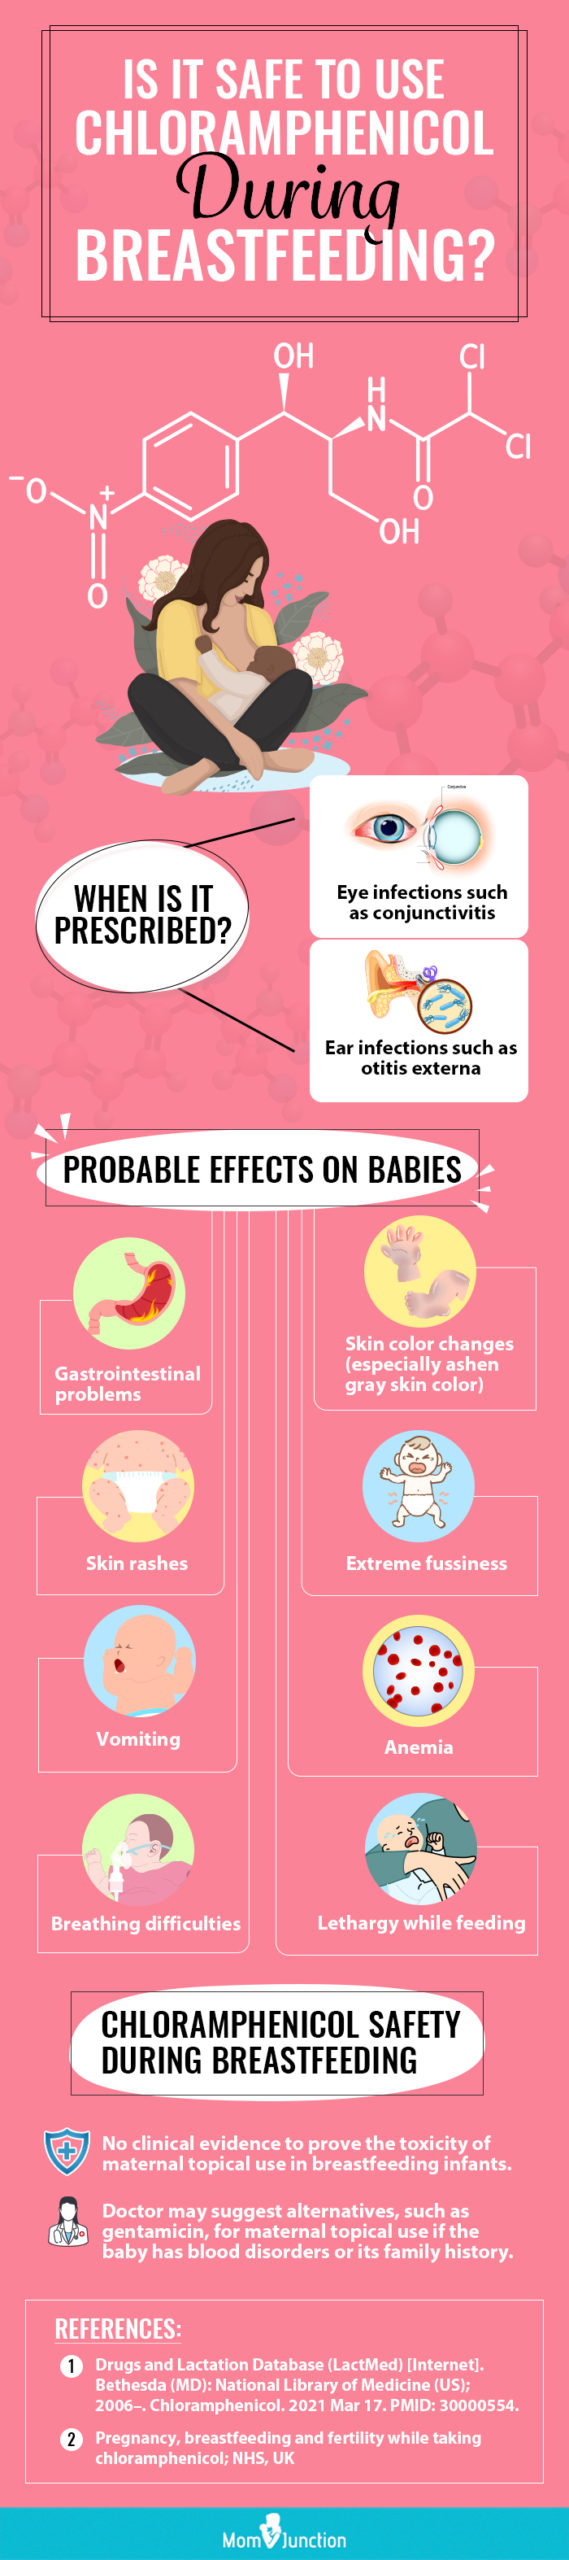 is it safe to use chloramphenicol during breastfeeding [infographic]